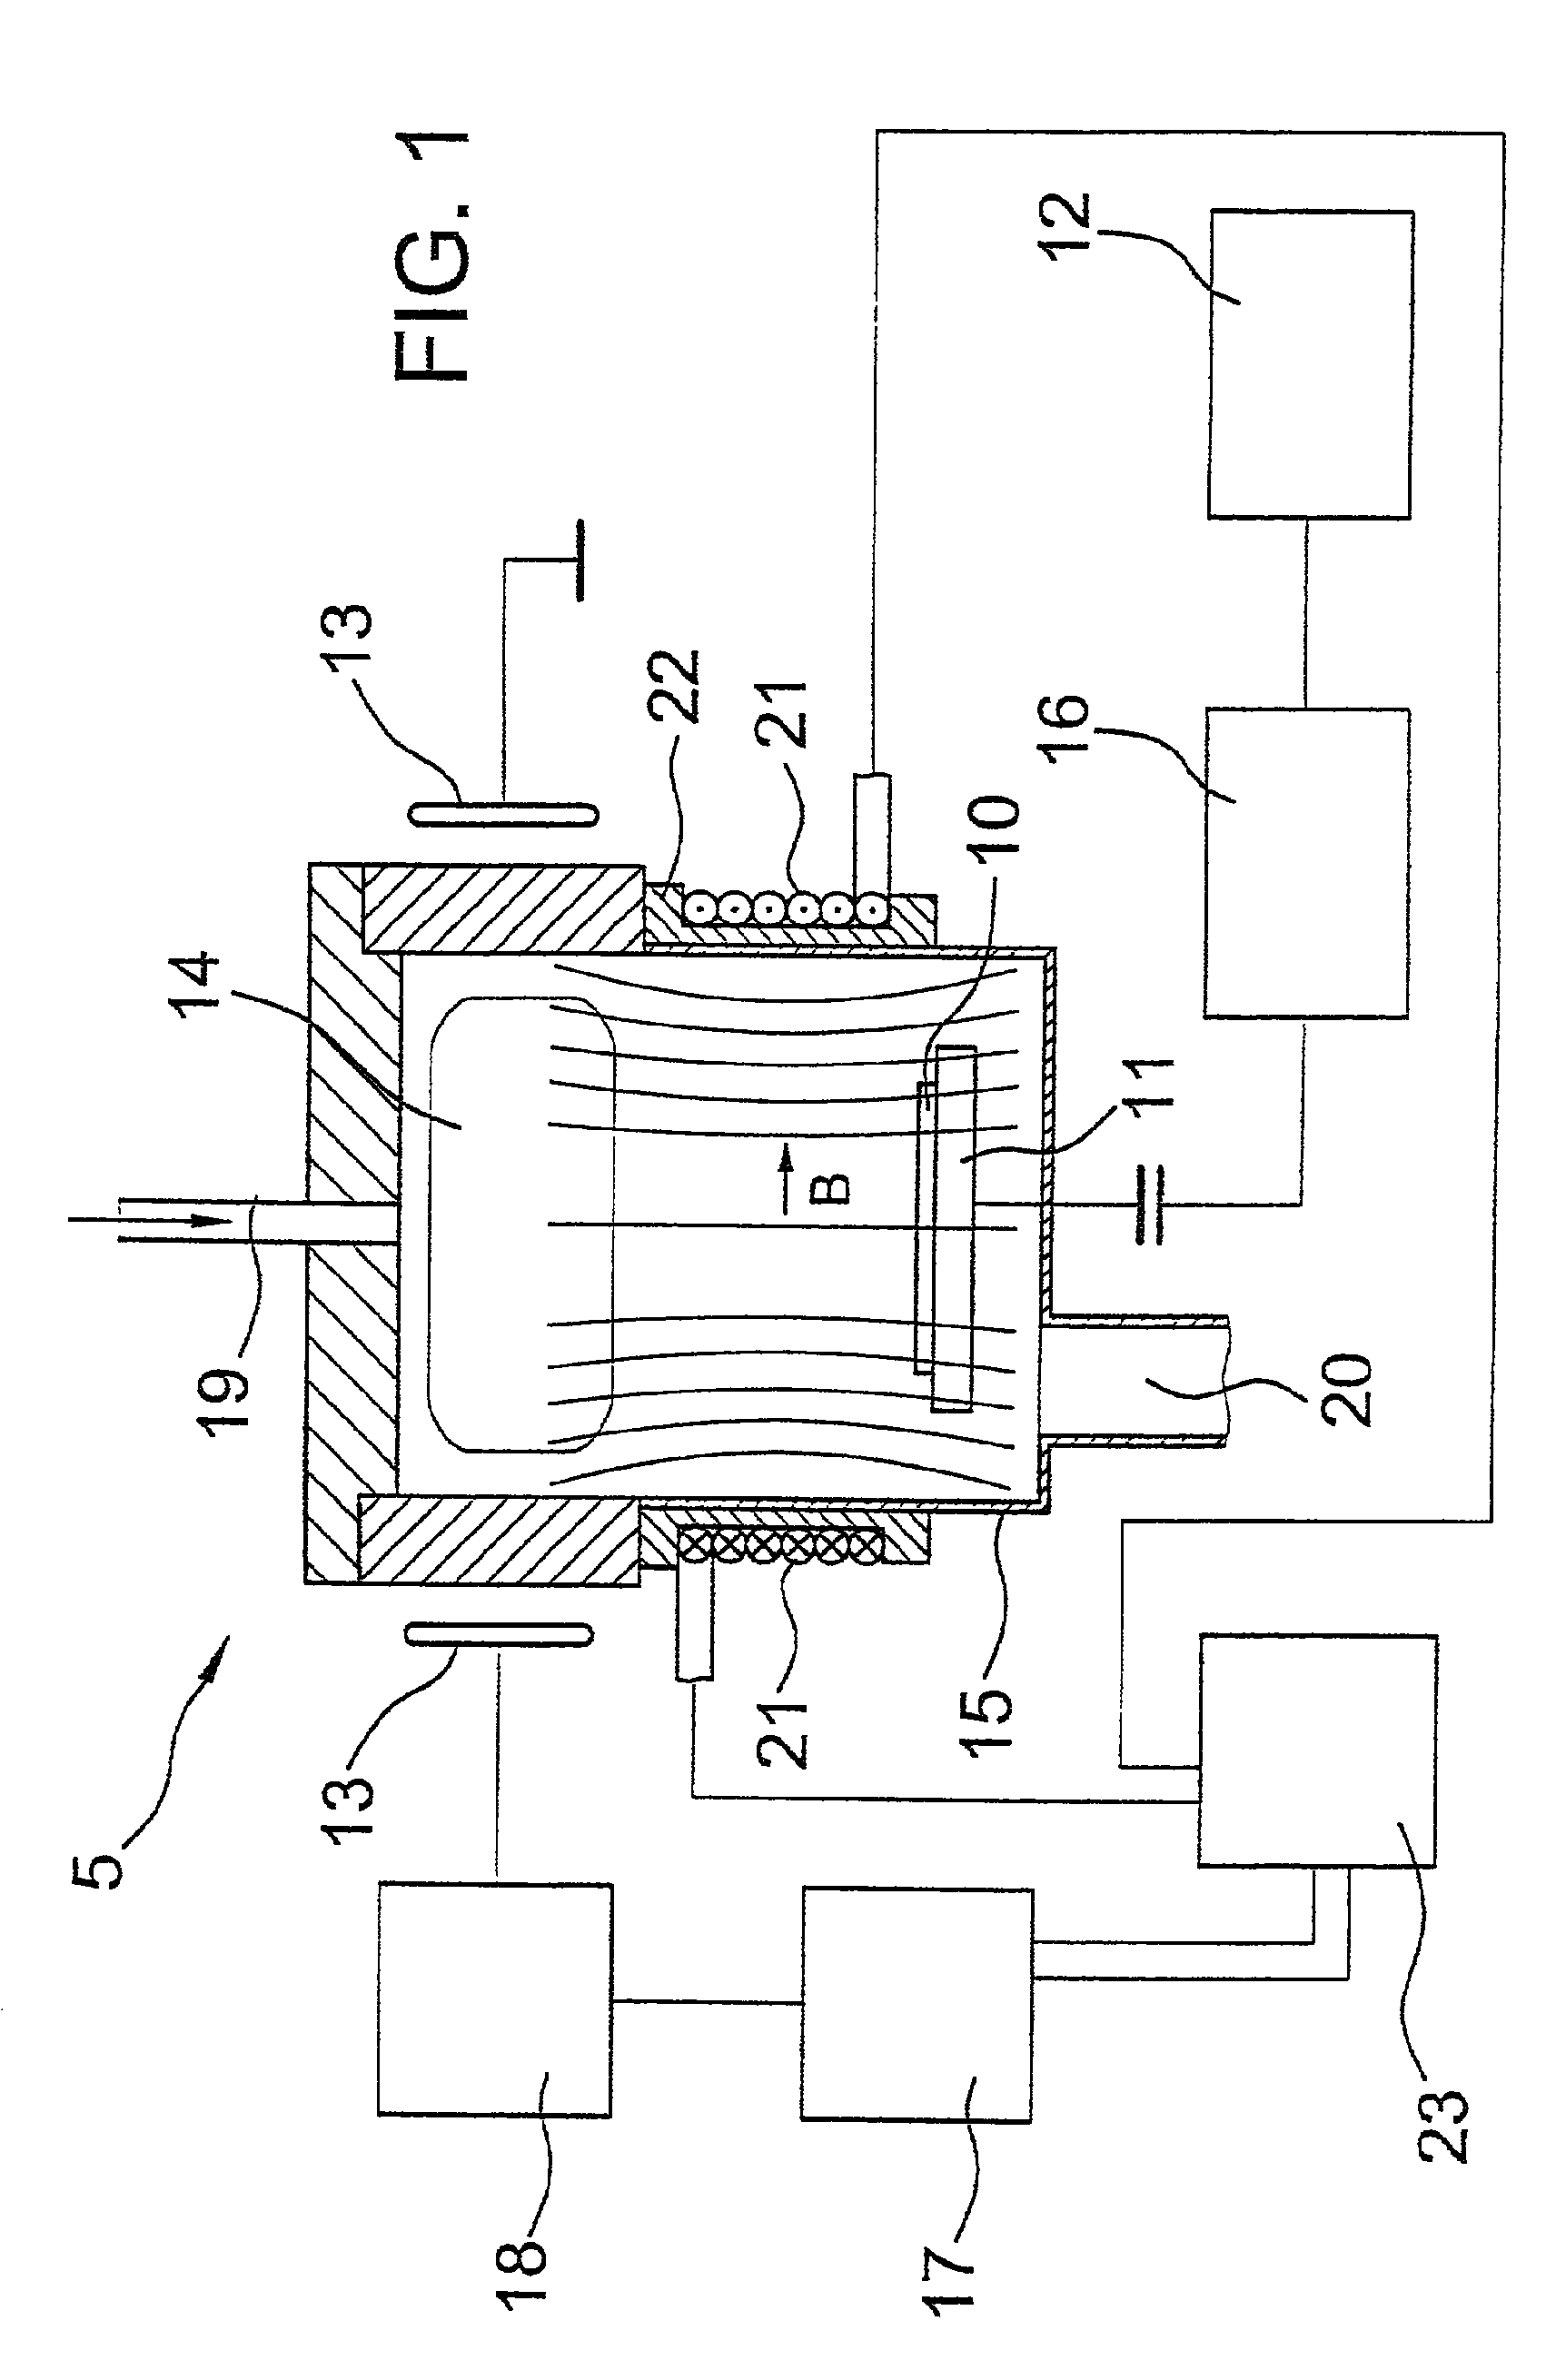 Device and method for etching a substrate using an inductively coupled plasma